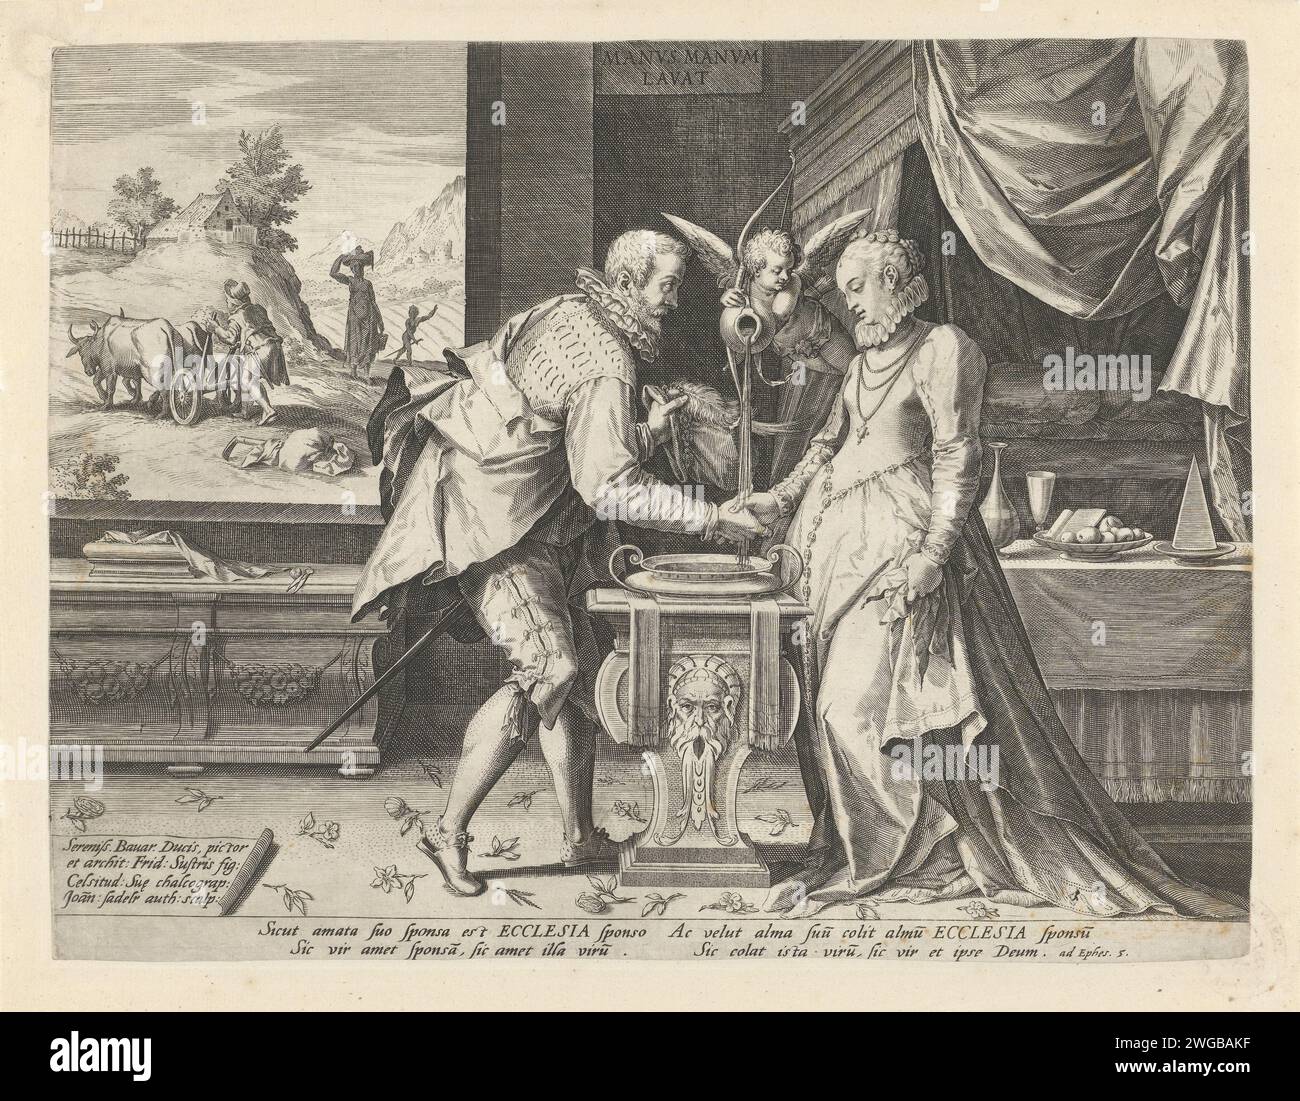 Allegory at marriage, Johann Sadeler (I), After Frederik Sustris, 1588 - 1595 print Cupido pours water over the hands of a man and woman who are opposite each other. At the rear right in the departure a four -poster bed. On the left through the window you can see a plowing farmer. The print has a Latin caption with a Bible quotation about marriage (Eph. 5). München paper engraving (personifications and symbolic representations of) Love; 'Amore (secondo Seneca)' (Ripa). 'Benevolenza et Unione matrimoniale', 'Concordia maritale' (Ripa). shaking hands, 'dextrarum junctio'. bed with tester. plough Stock Photo